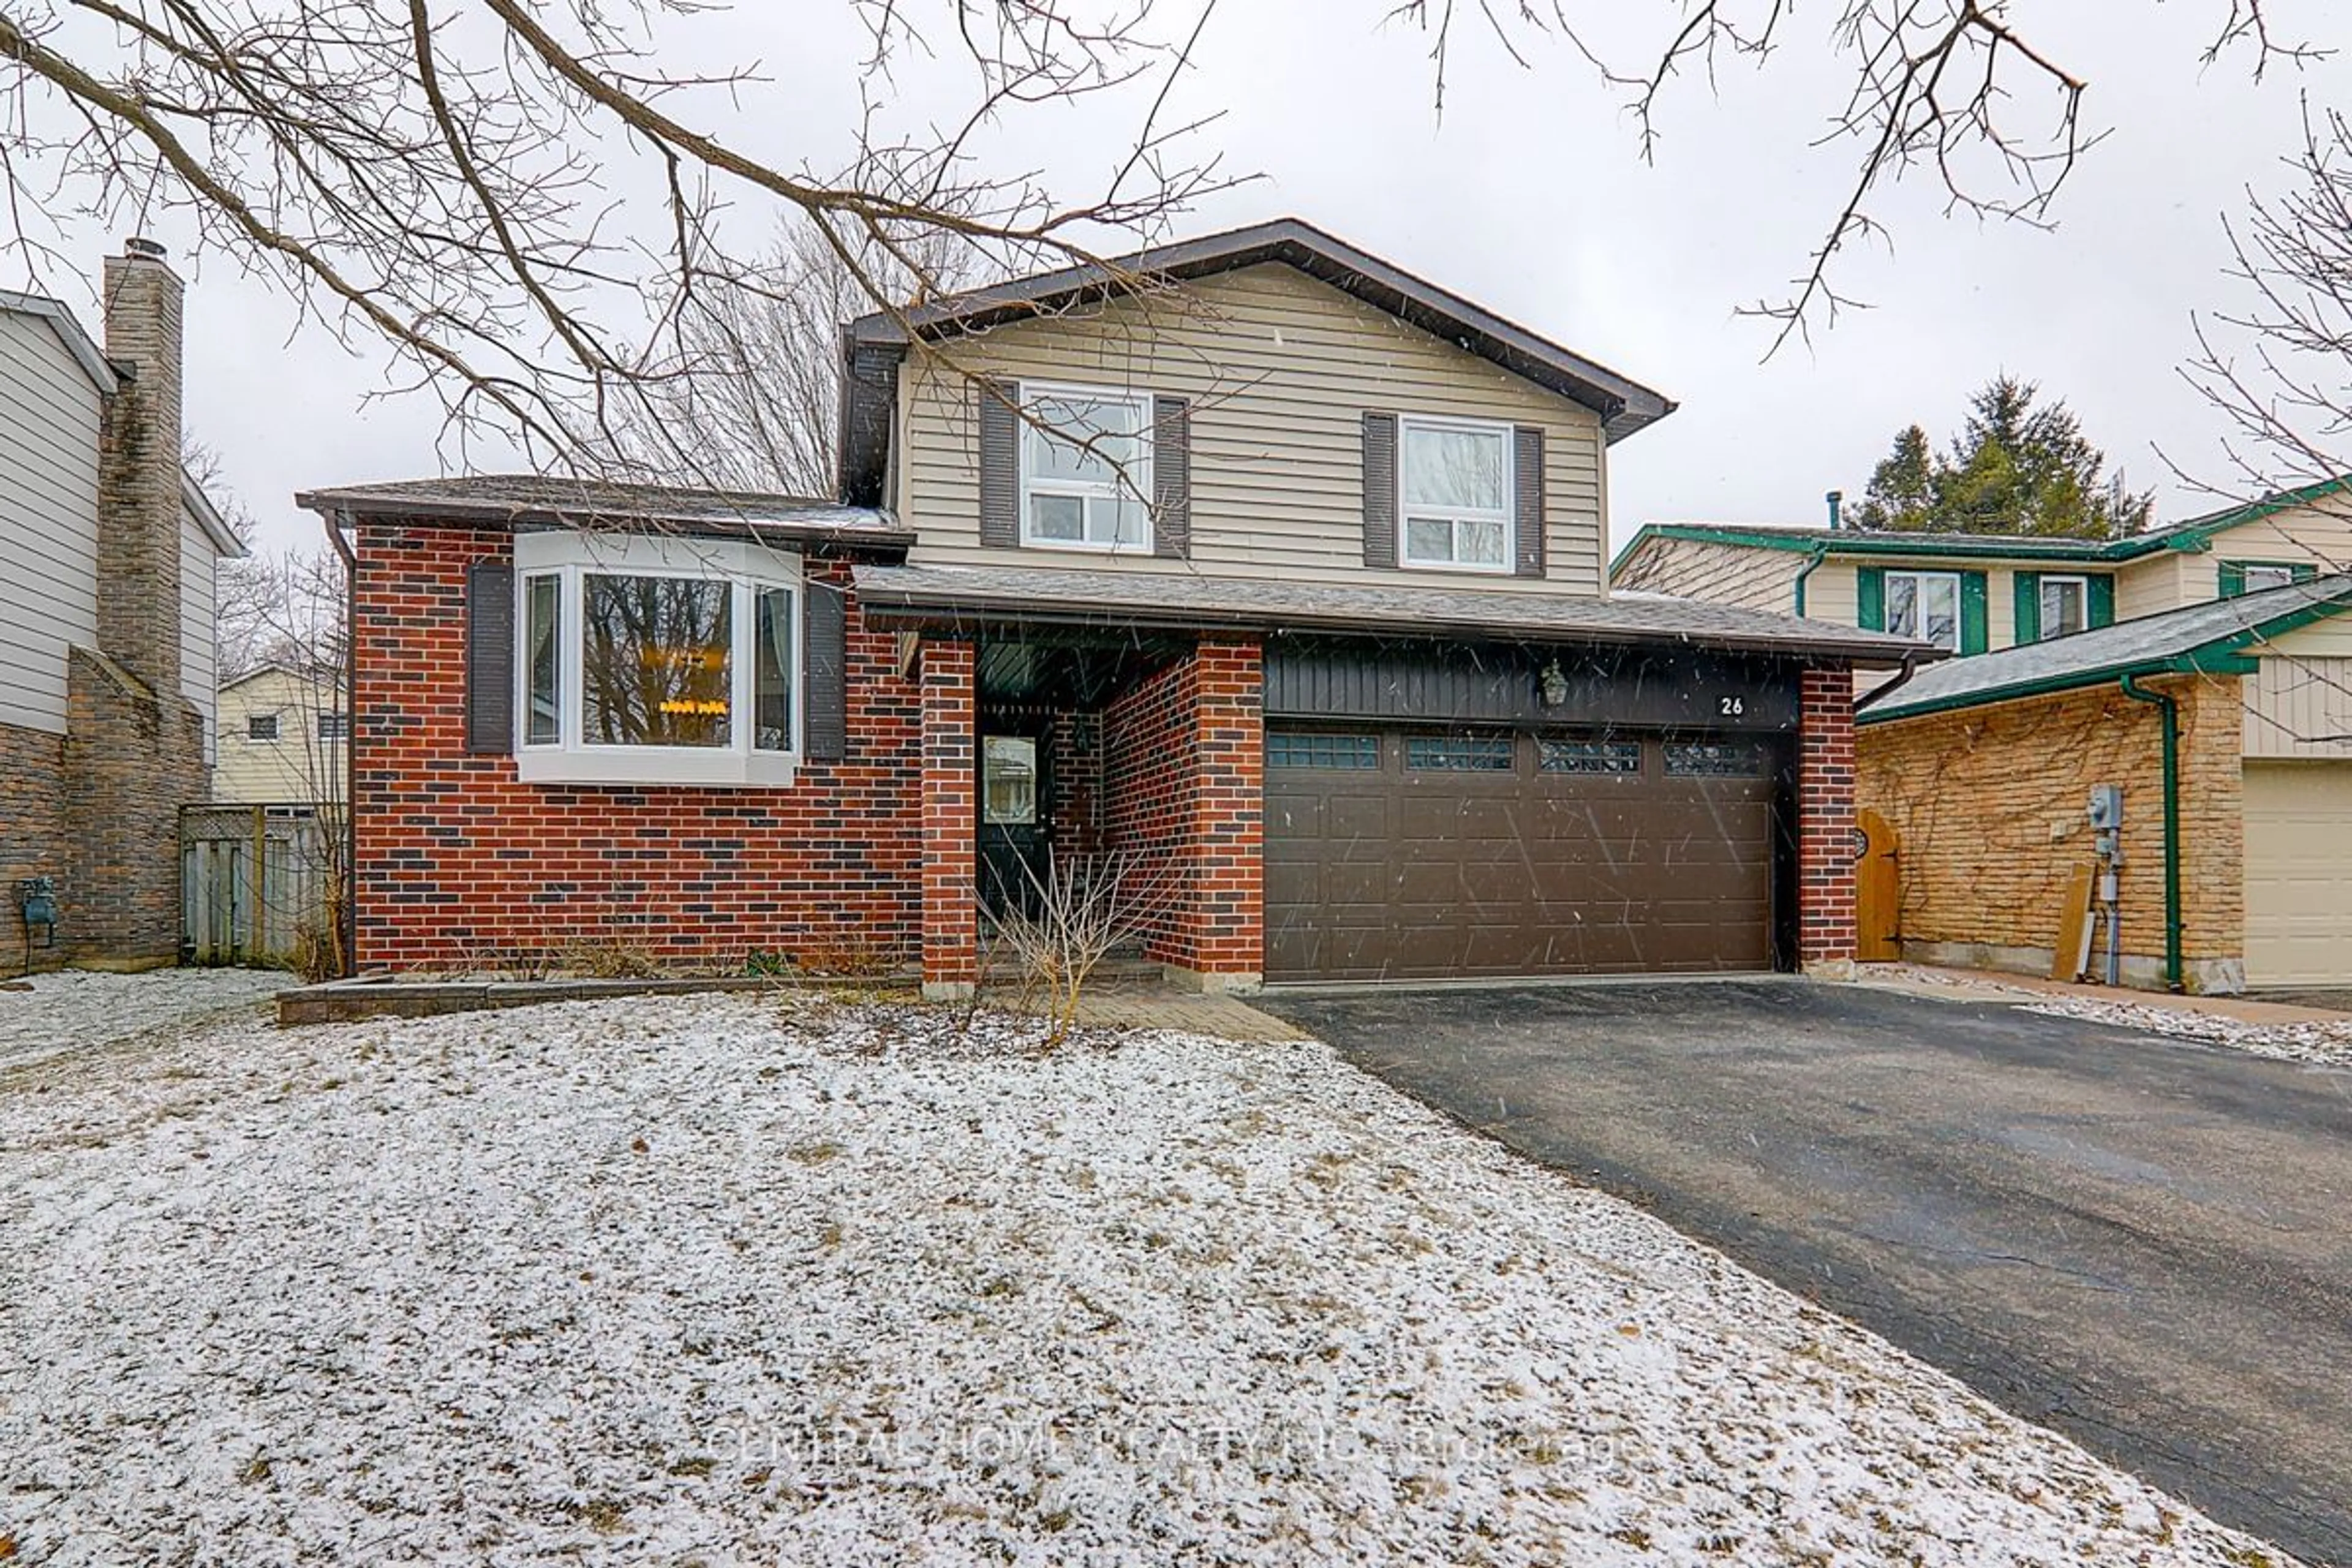 Home with brick exterior material for 26 Ashton Rd, Newmarket Ontario L3Y 5R4